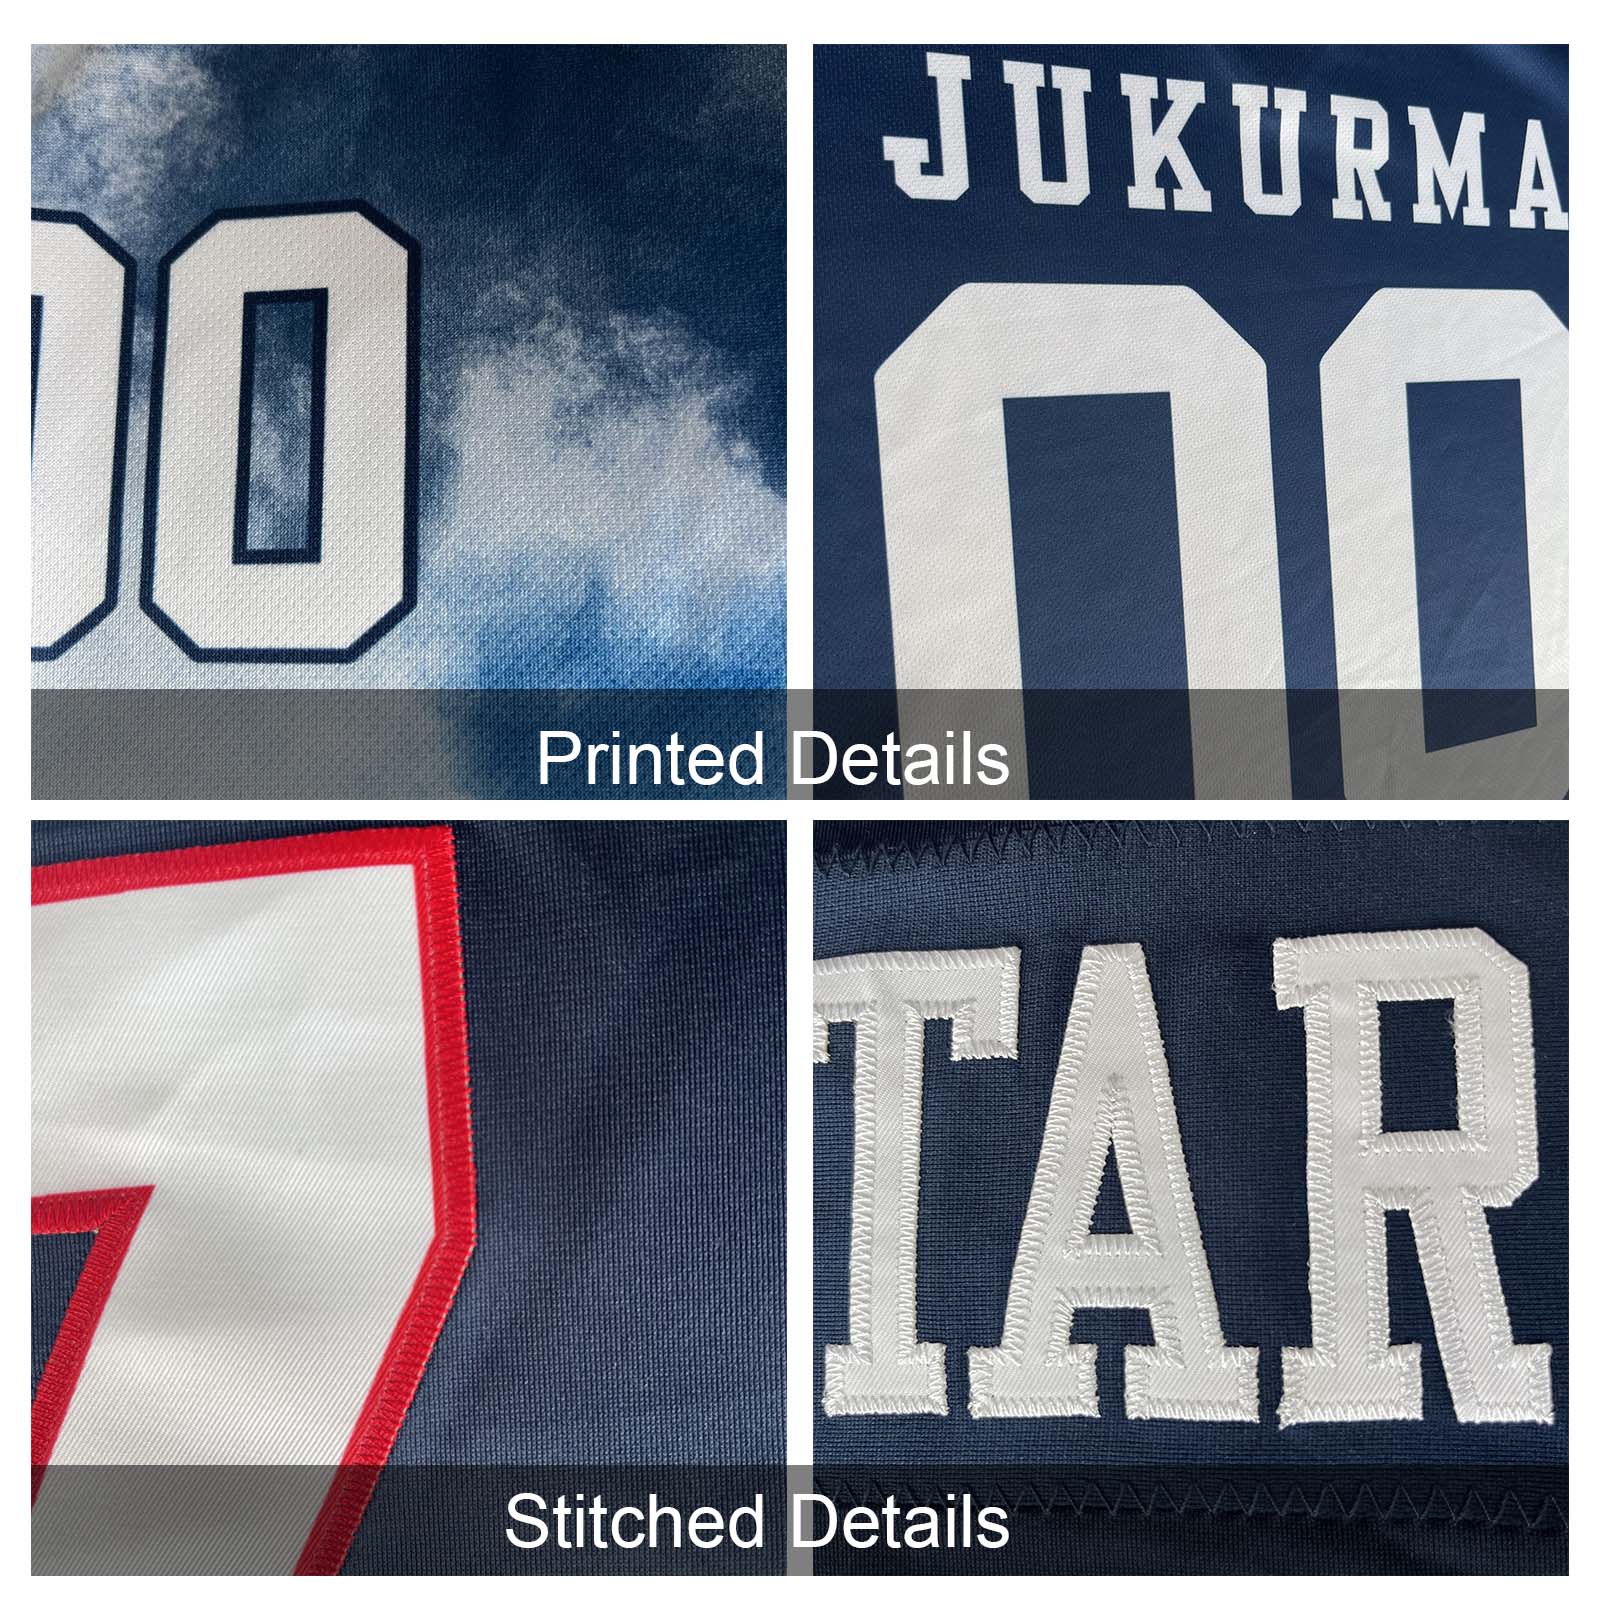 Custom Football Jersey Shirt Personalized Stitched Printed Team Name Number Navy